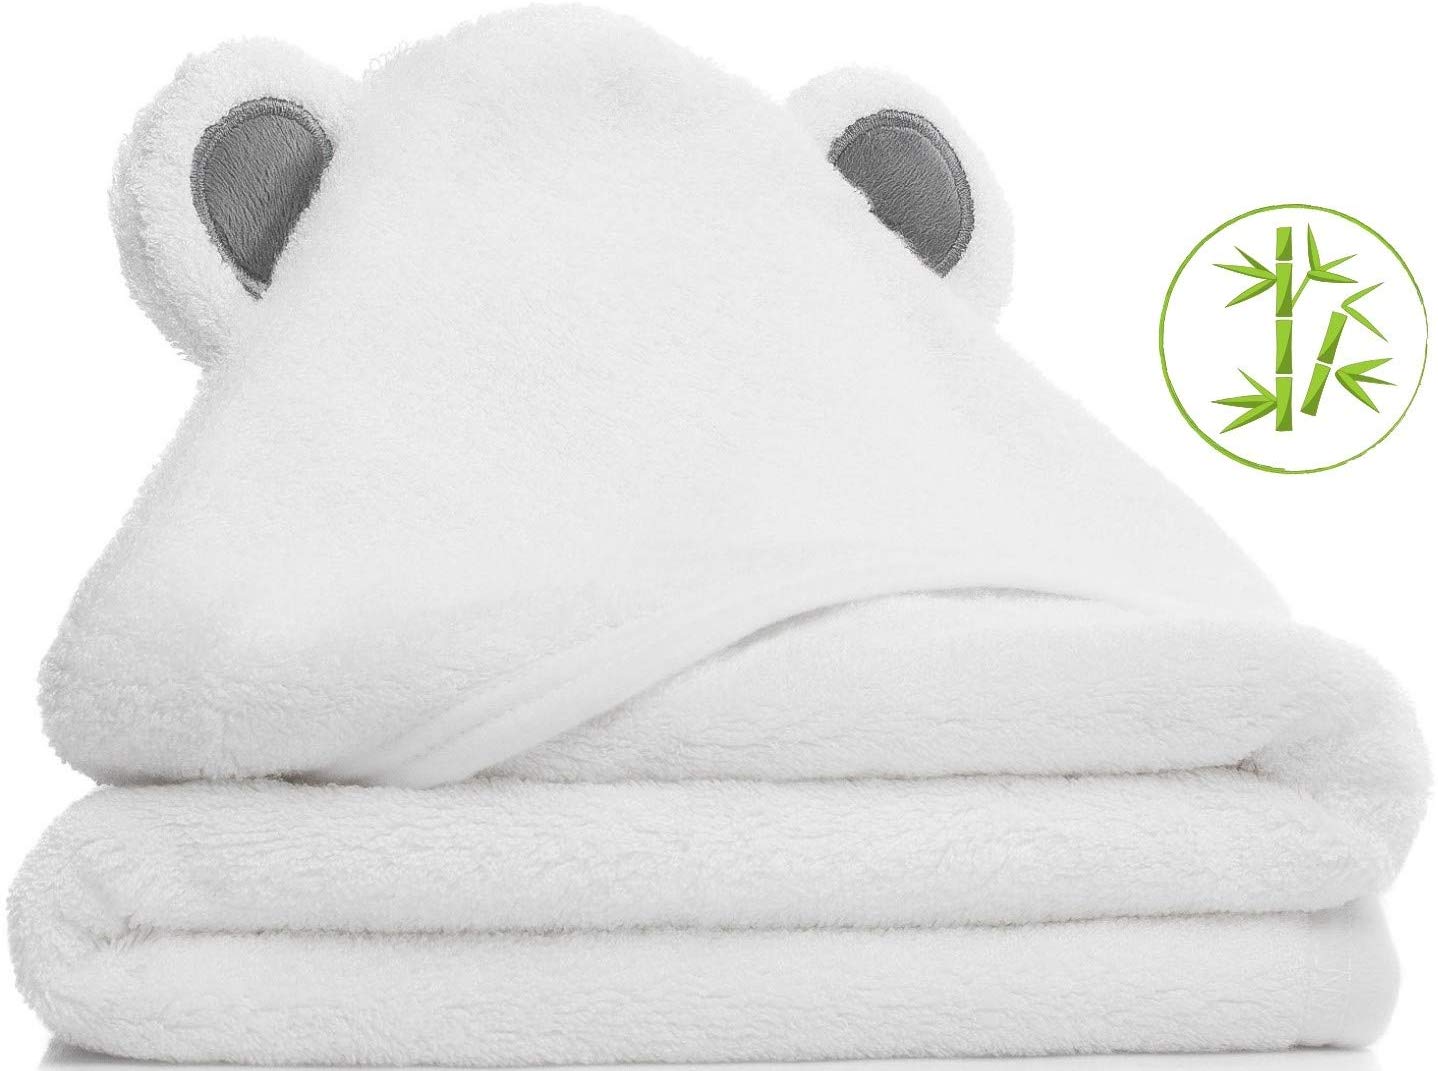 Extra Thick Bamboo Baby Towel with Ears - Ideal Gift for Newborns Infants and Toddlers up to 3 Years - Bundle: Included Washcloth + 2 Hanging Hooks